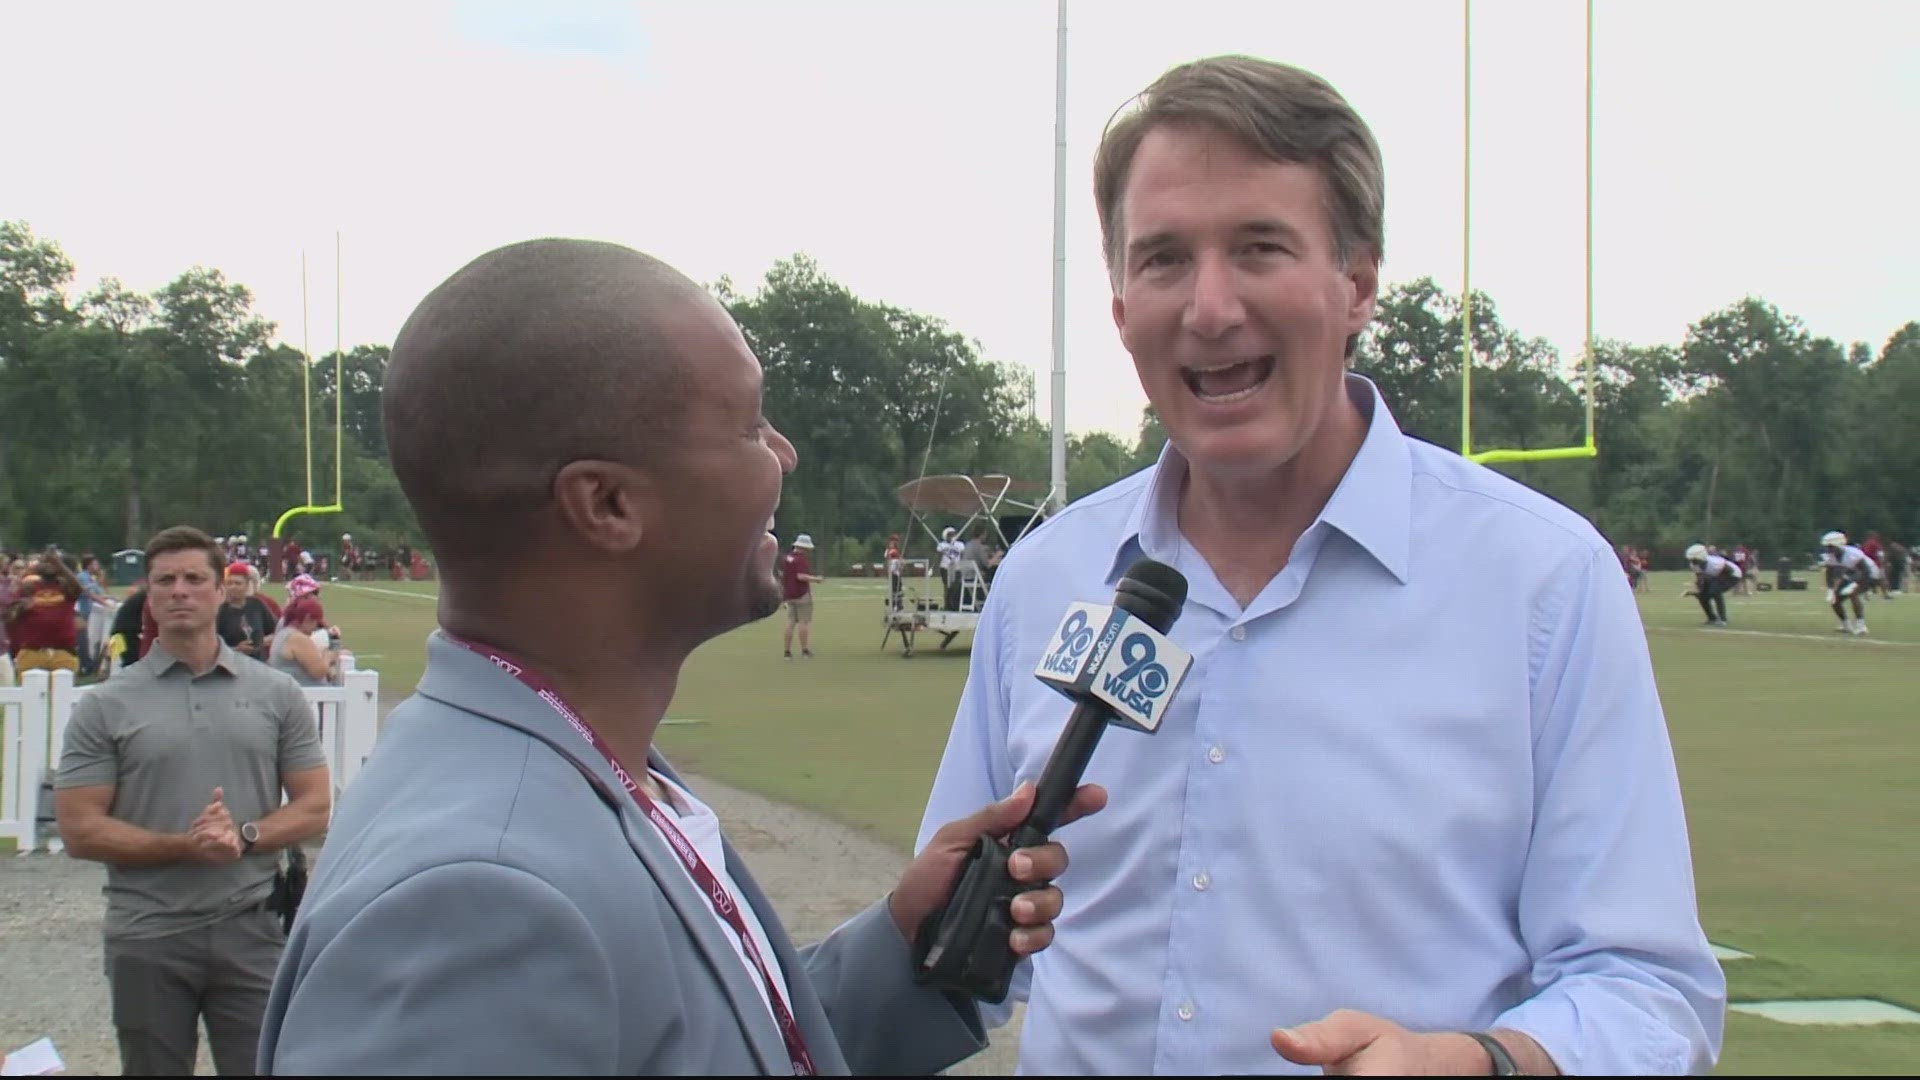 Governor Glenn Youngkin decided to hit up Commanders training camp today in Ashburn.